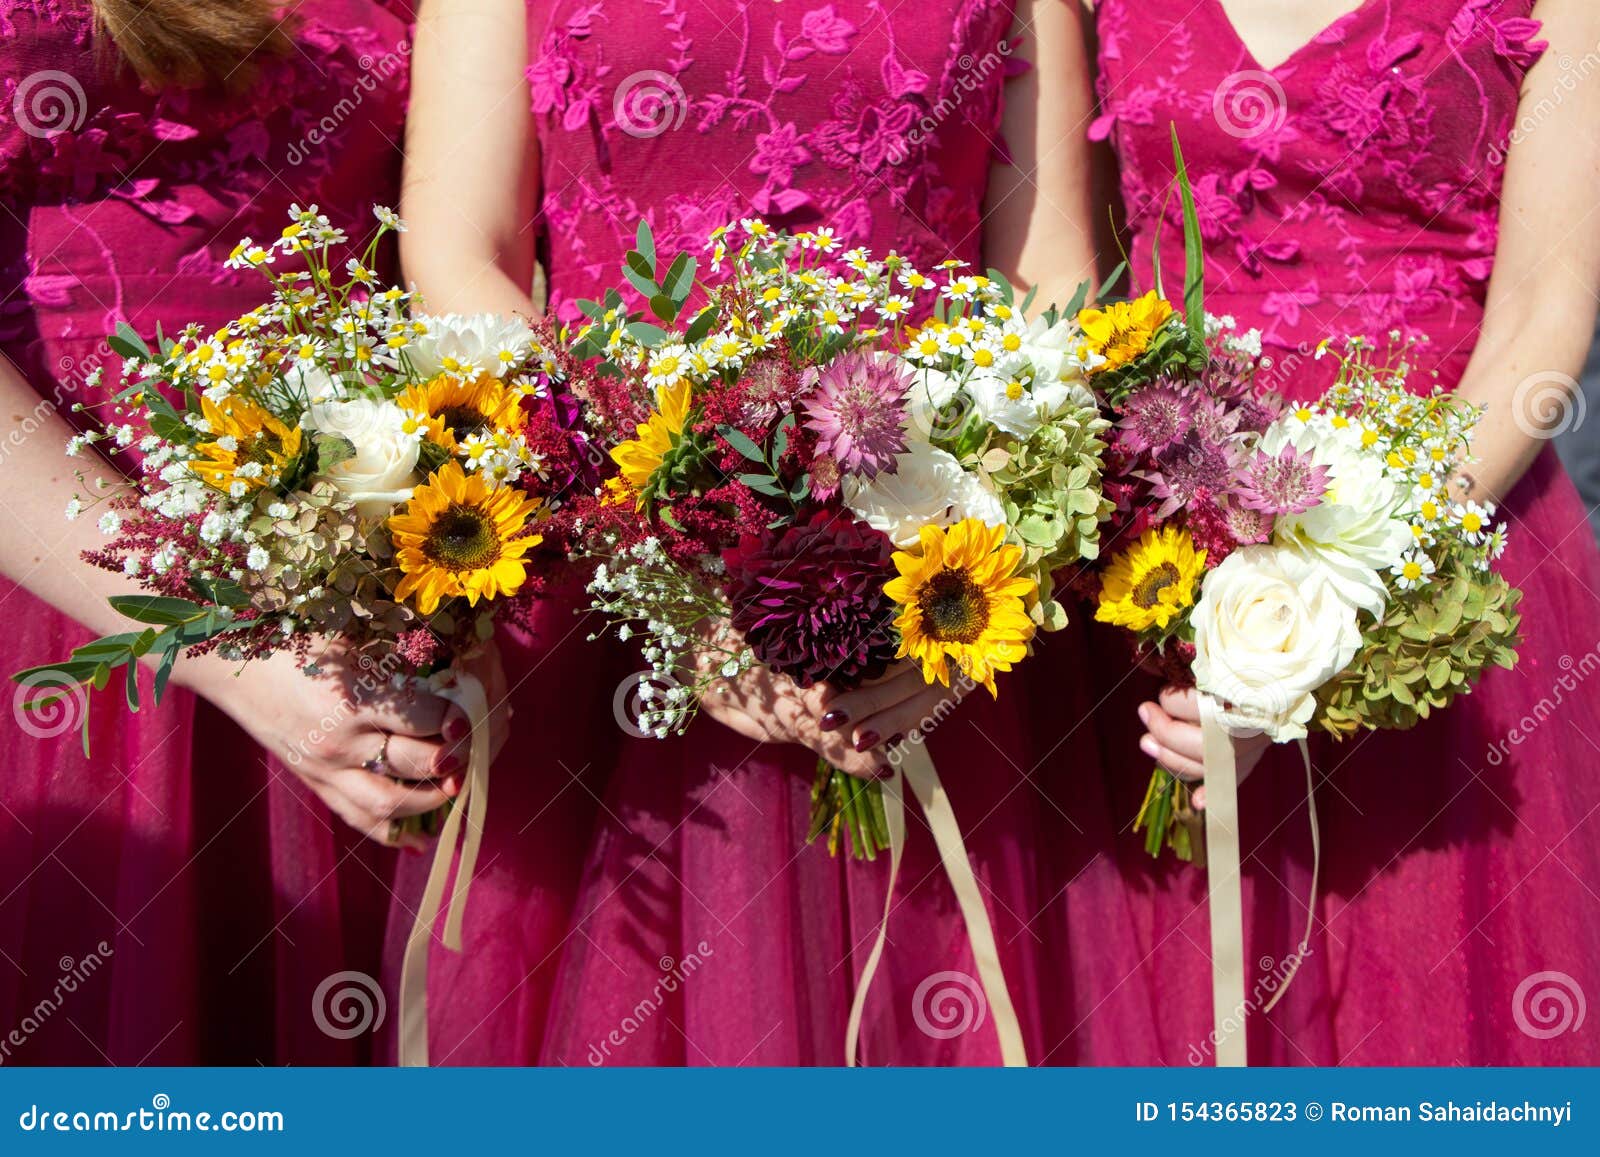 Three Bridesmaids in Lilac Lace Dresses with Bouquets of Fresh Flowers ...